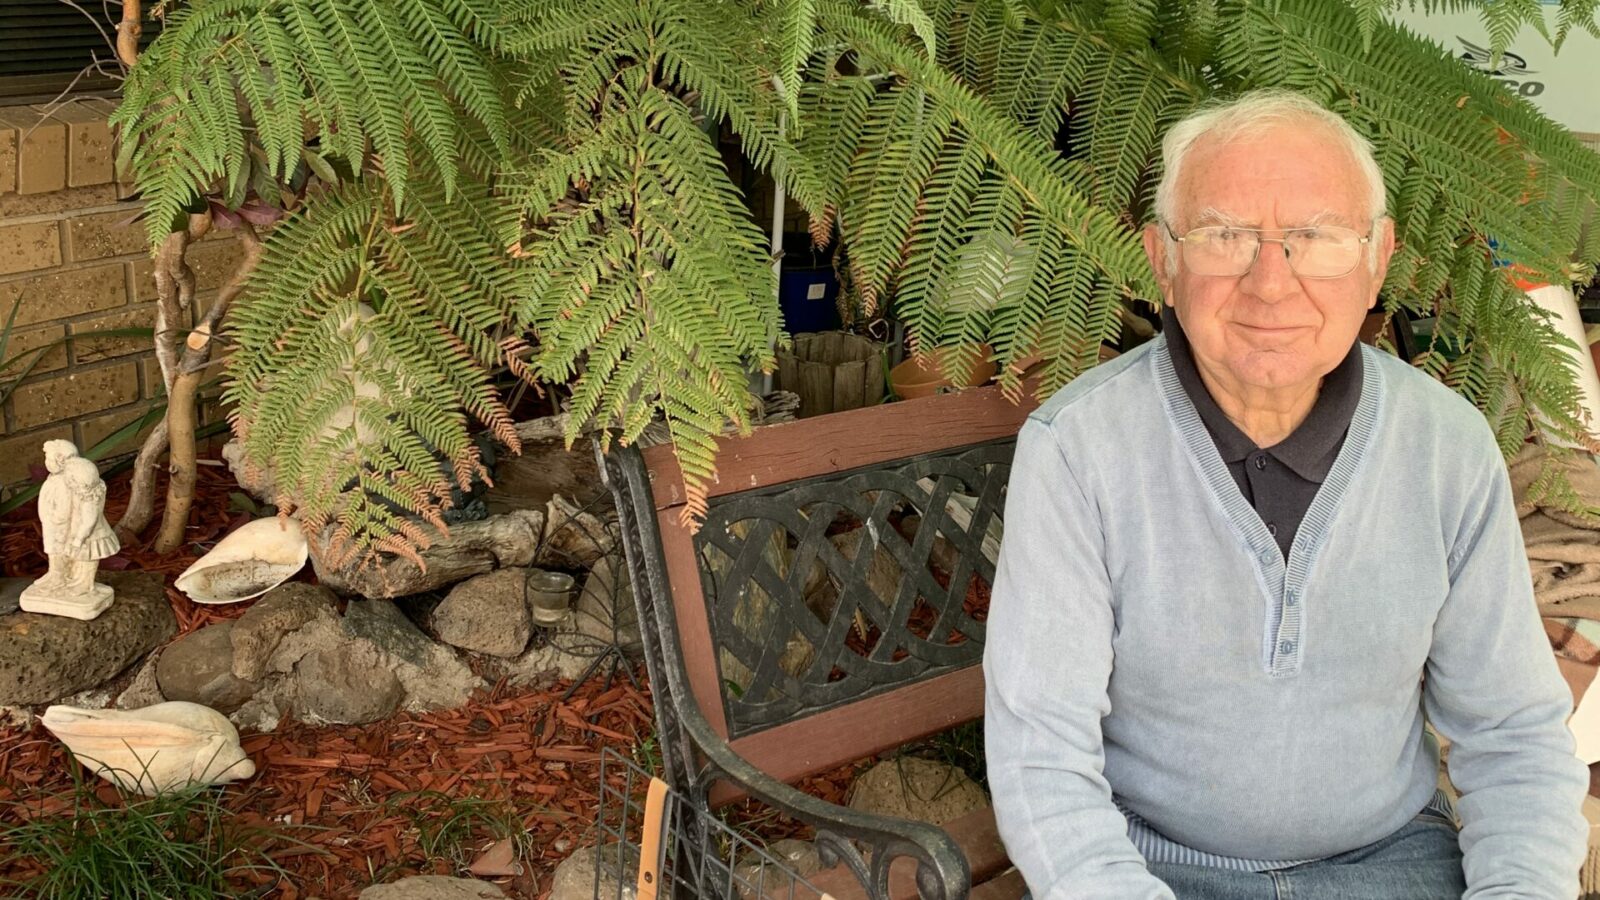 Elderly gentleman sitting on a bench in front of ferns and garden ornaments.